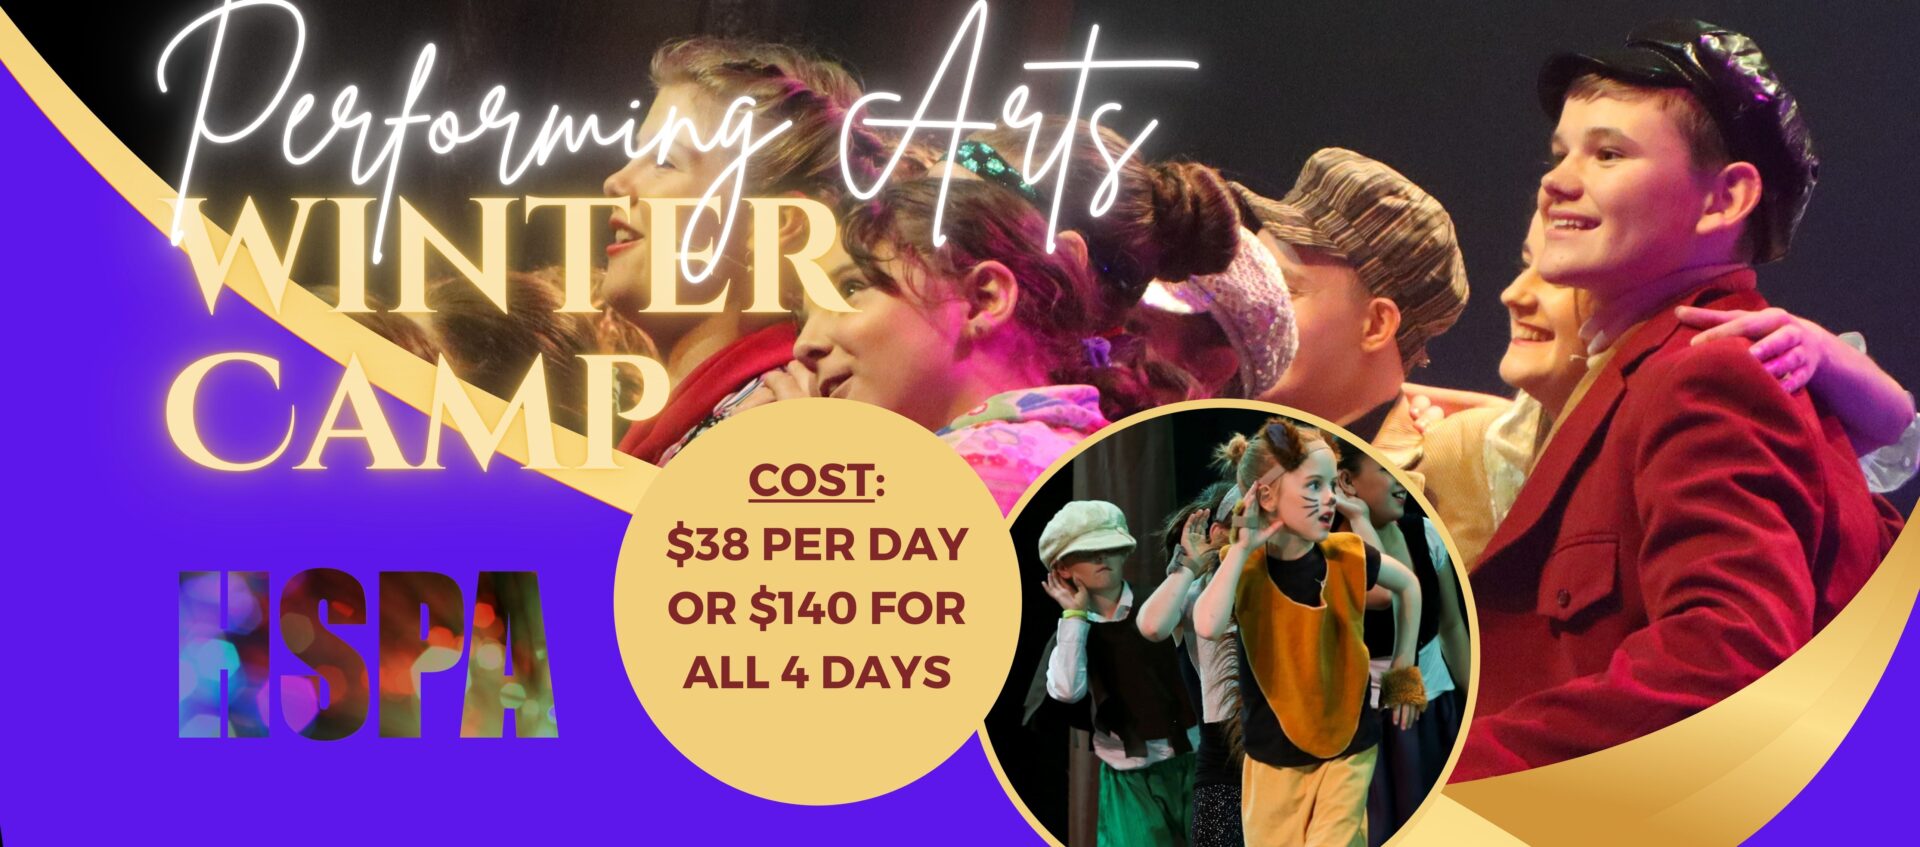 Image of Performing Arts Winter Camp event